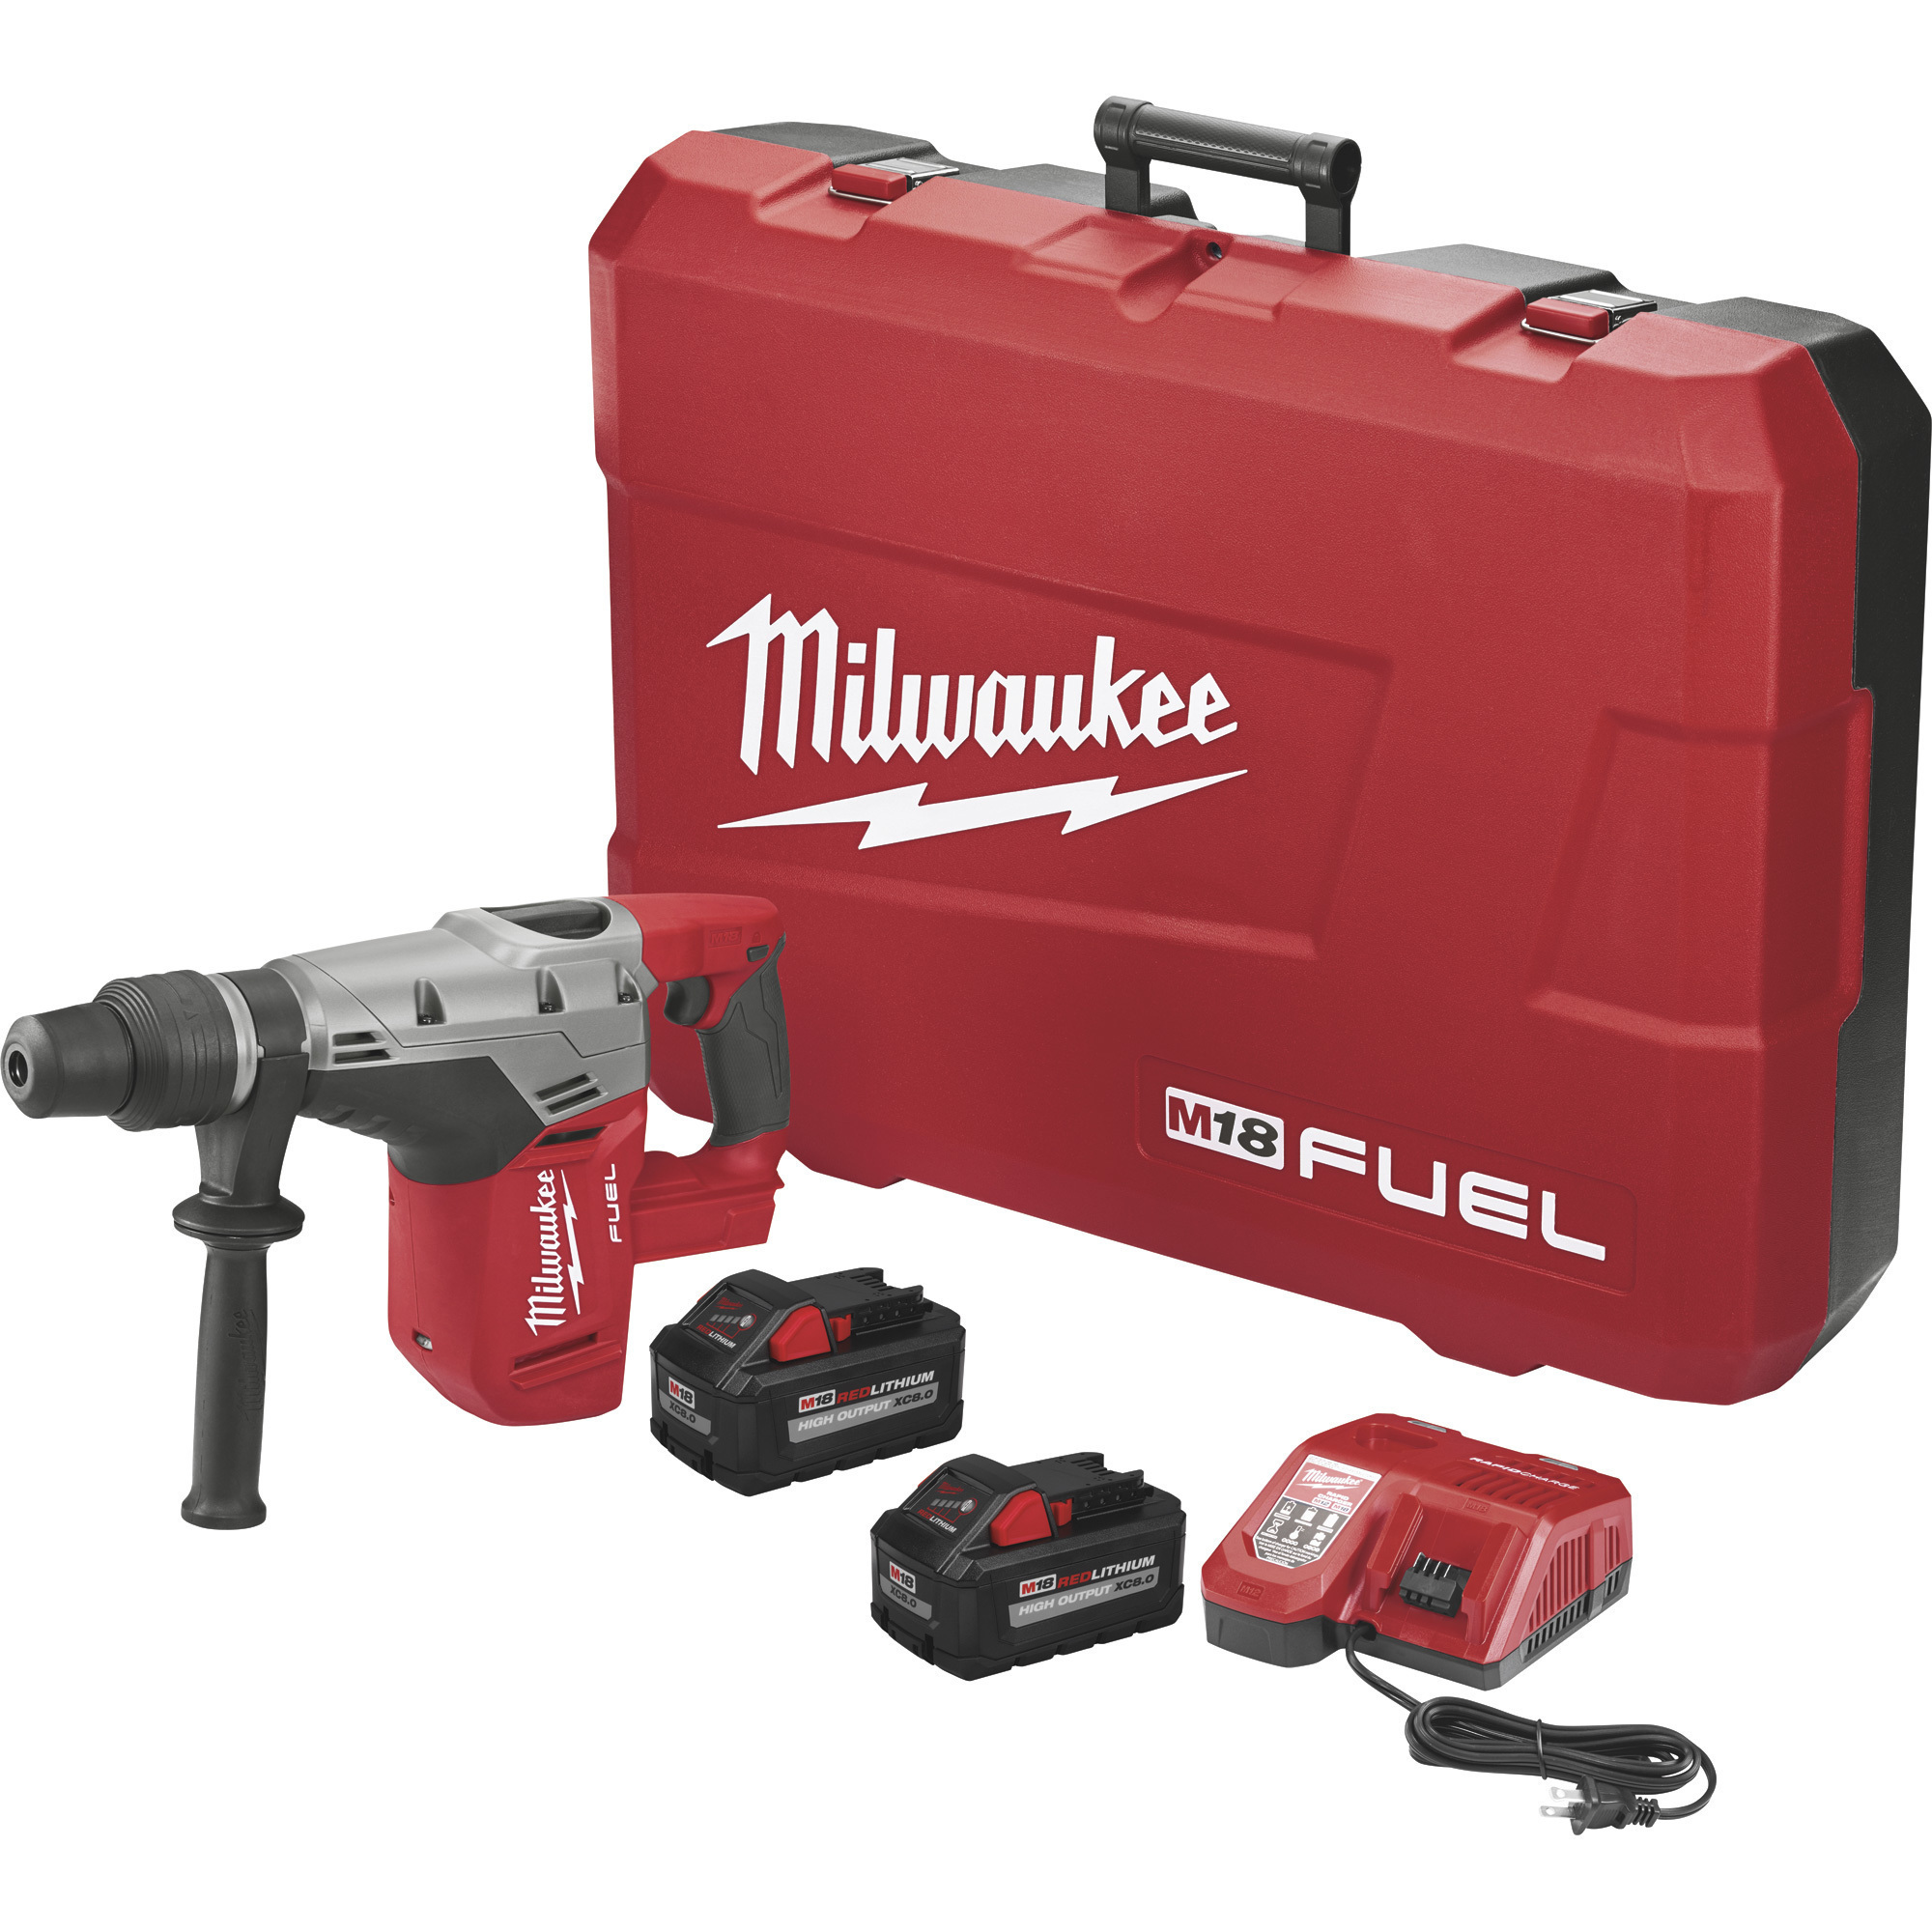 Milwaukee M18 Fuel 1 9/16Inch SDS Max Hammer Drill Kit, With 2 Batteries, 18 Volt, Model 2717-22HD